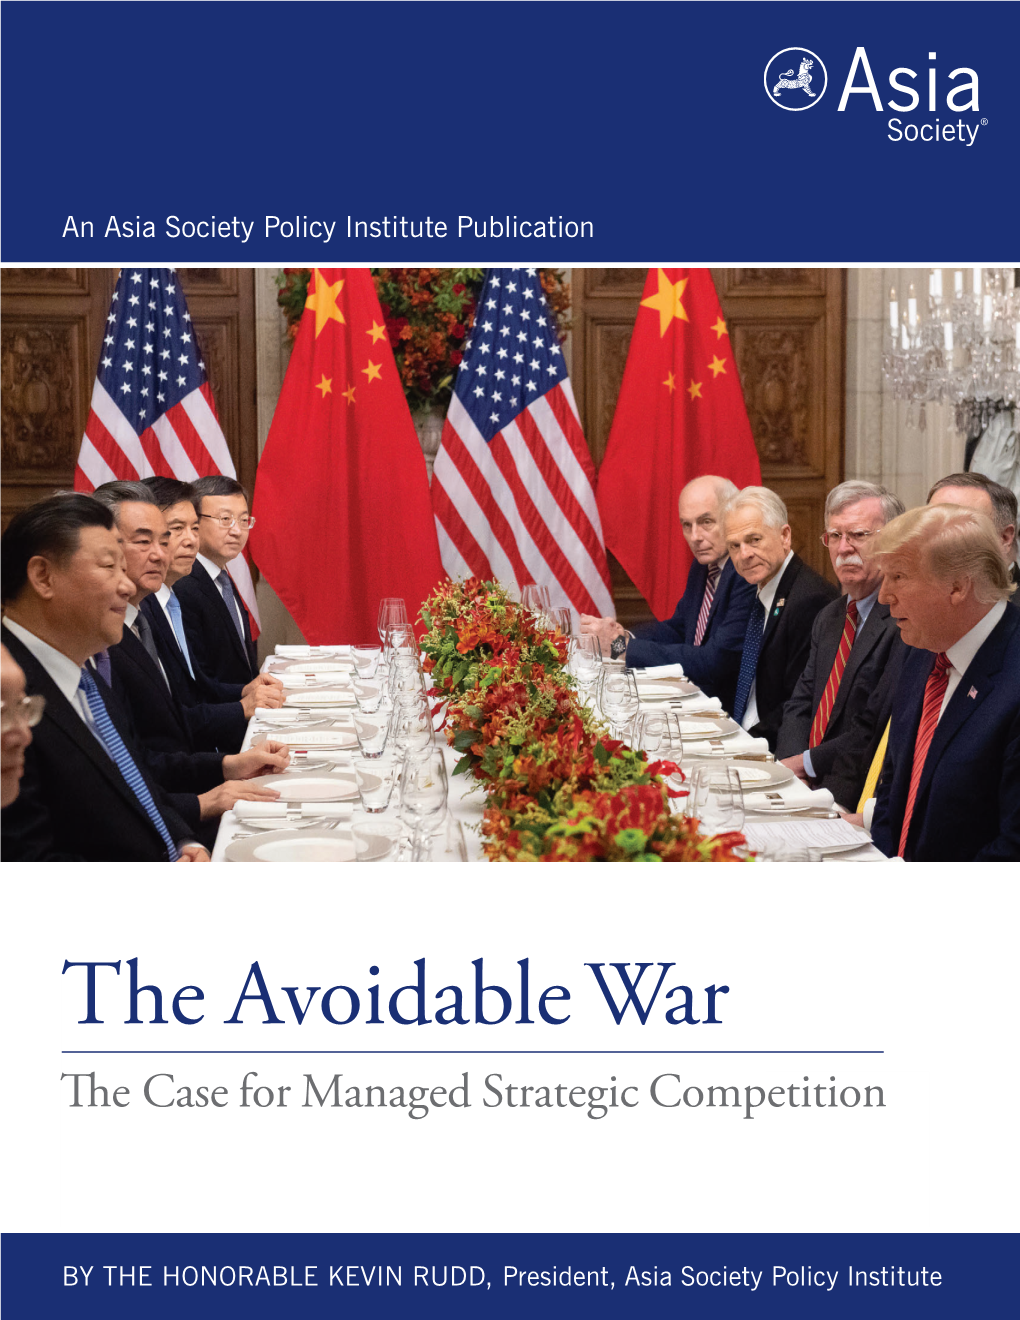 The Avoidable War: the Case for Managed Strategic Competition